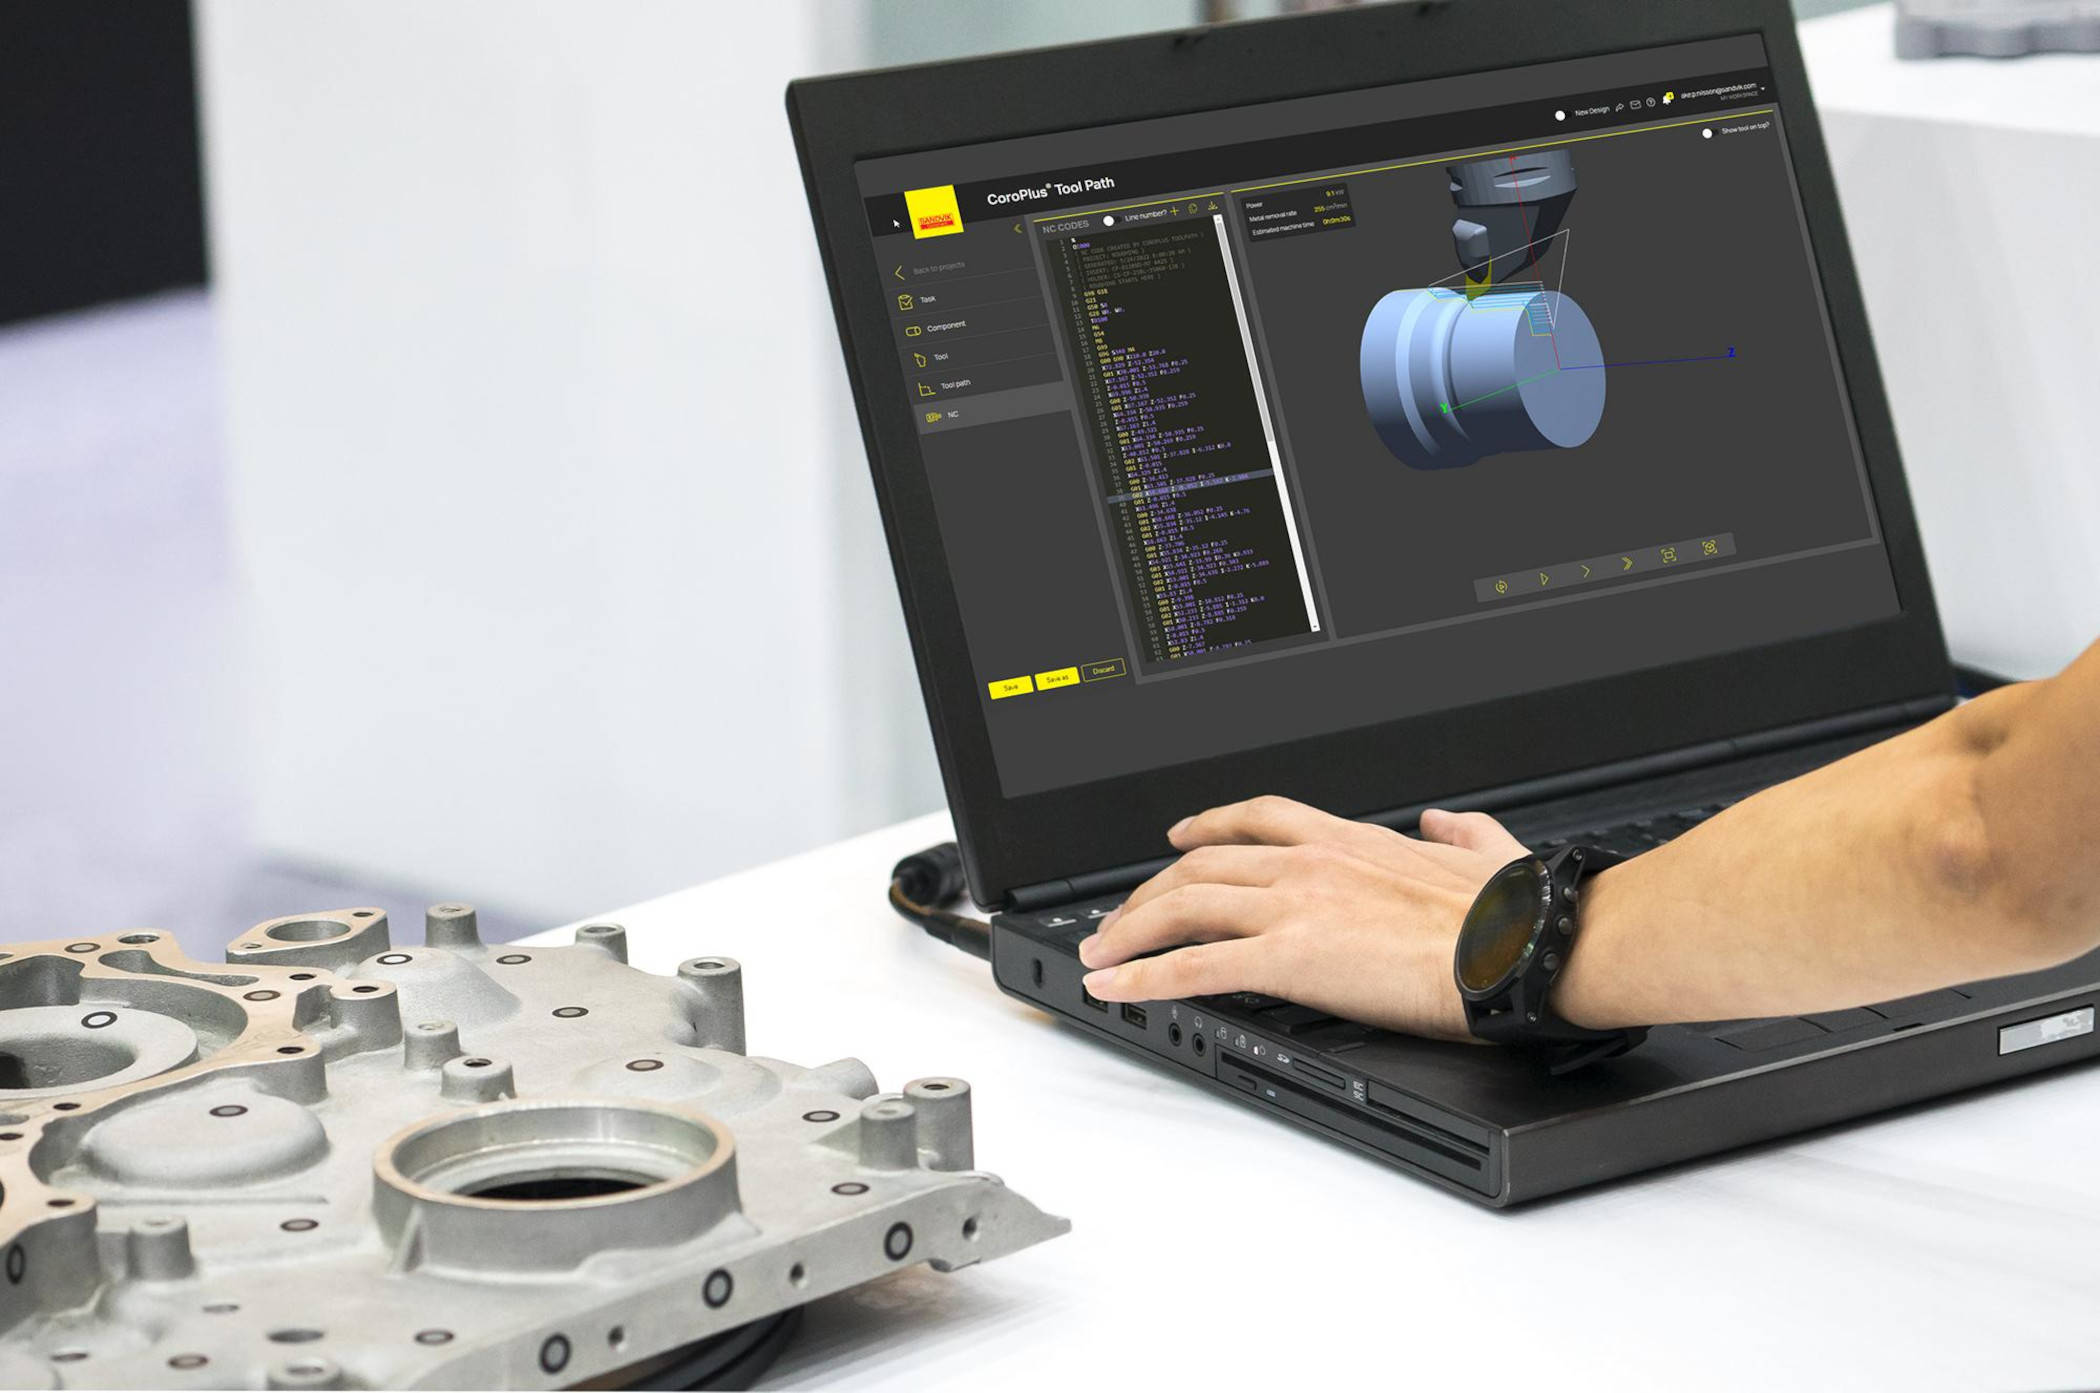 The online digital software tool CoroPlus Tool Path supplies programming numerical control (NC) codes and other parameters for optimized machining.